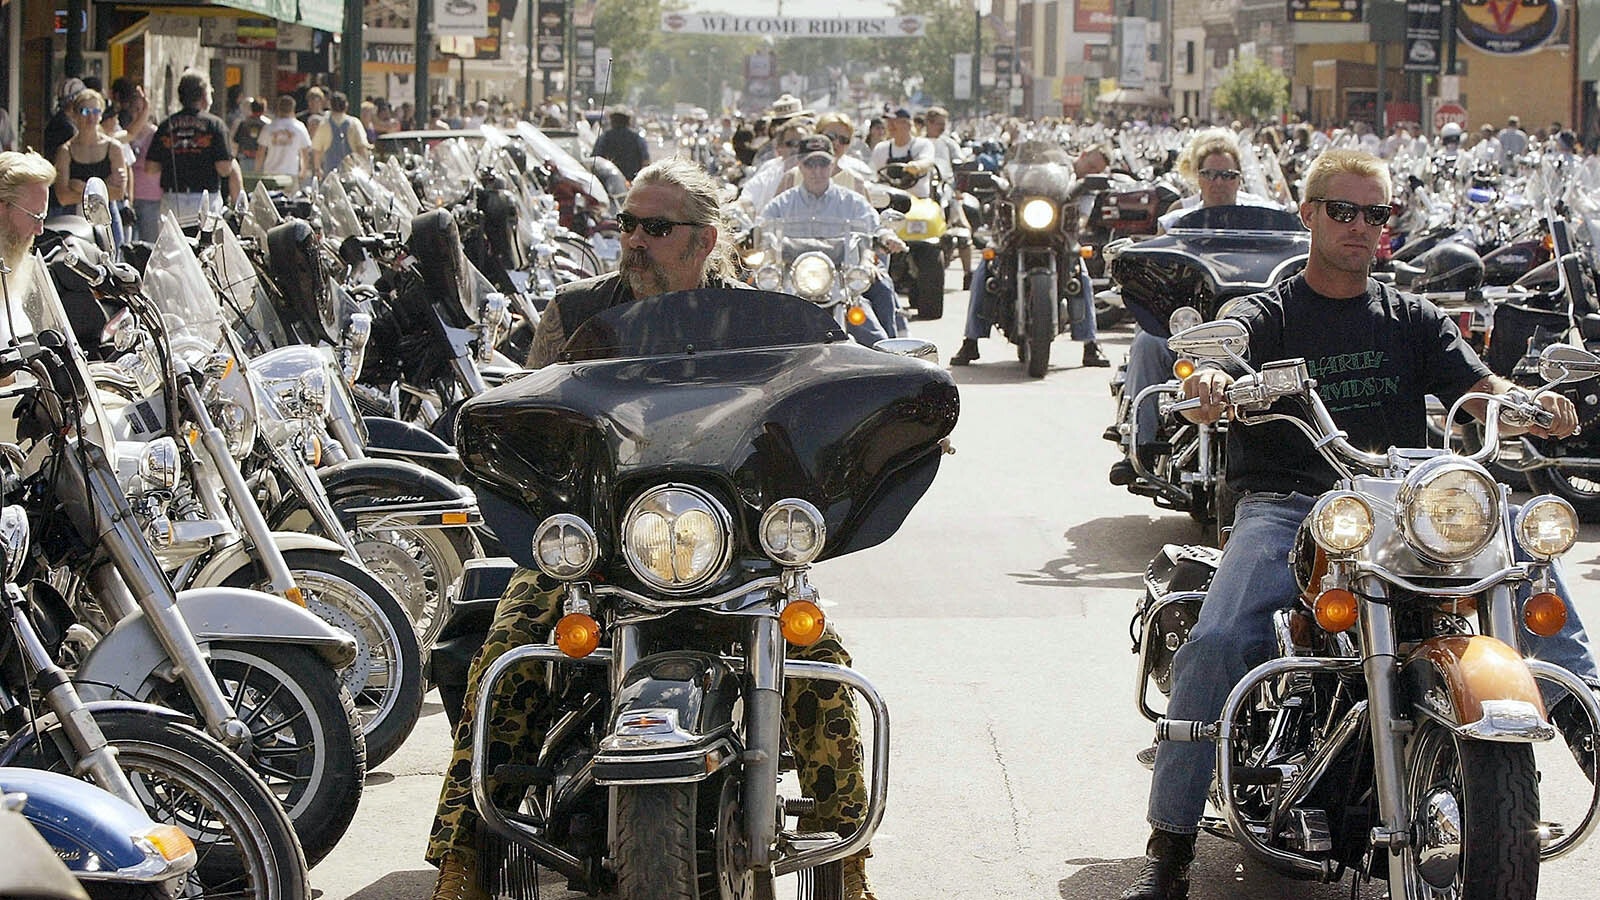 Bikers cruise during the annual Sturgis Motorcycle Rally down Main Street. The weeklong rally attracts an estimated 500,000 people to this town of 7,000 in the southwestern corner of the state.